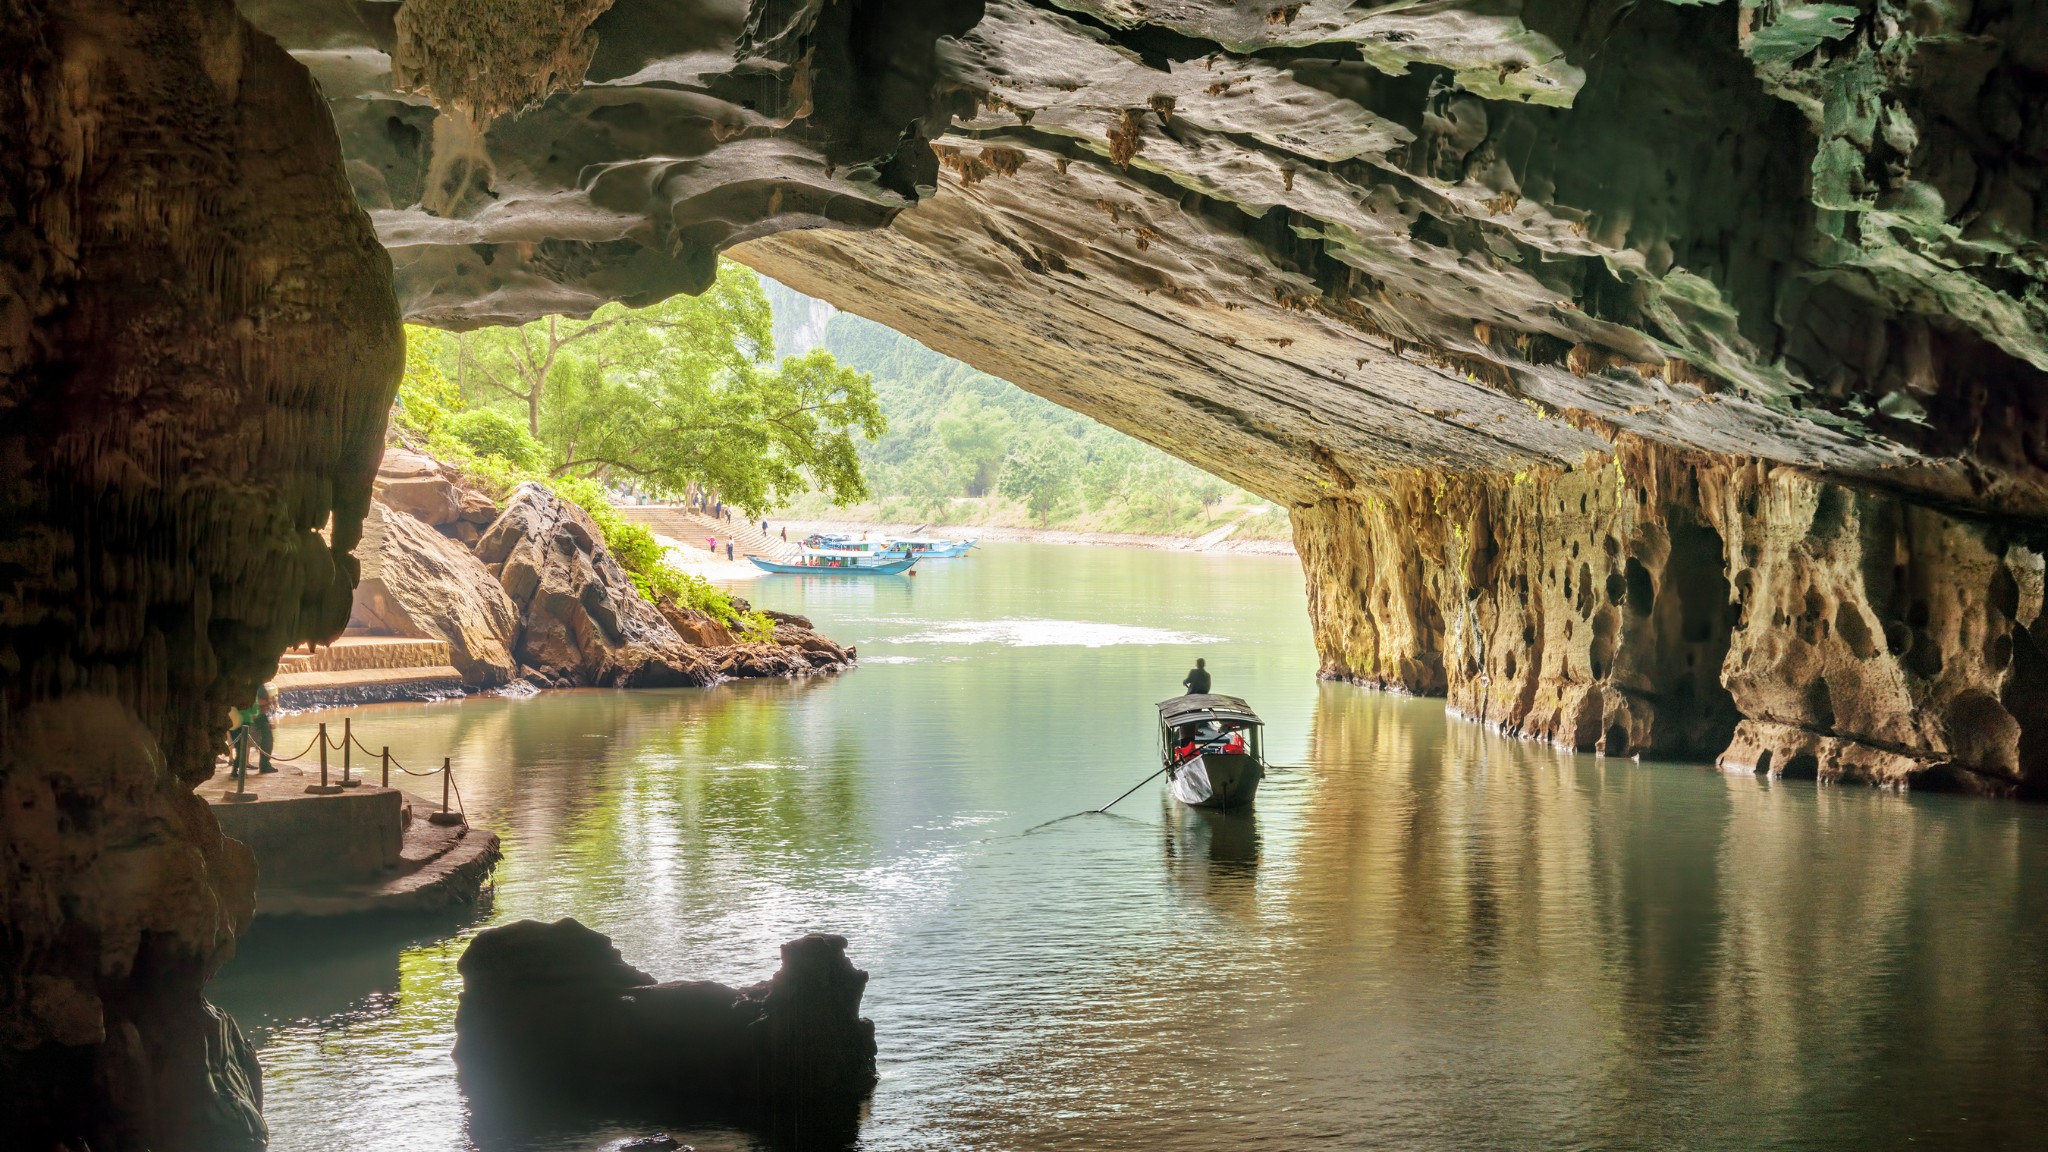 Day 7 Take A Boat Tour To Explore Magnificent Caves